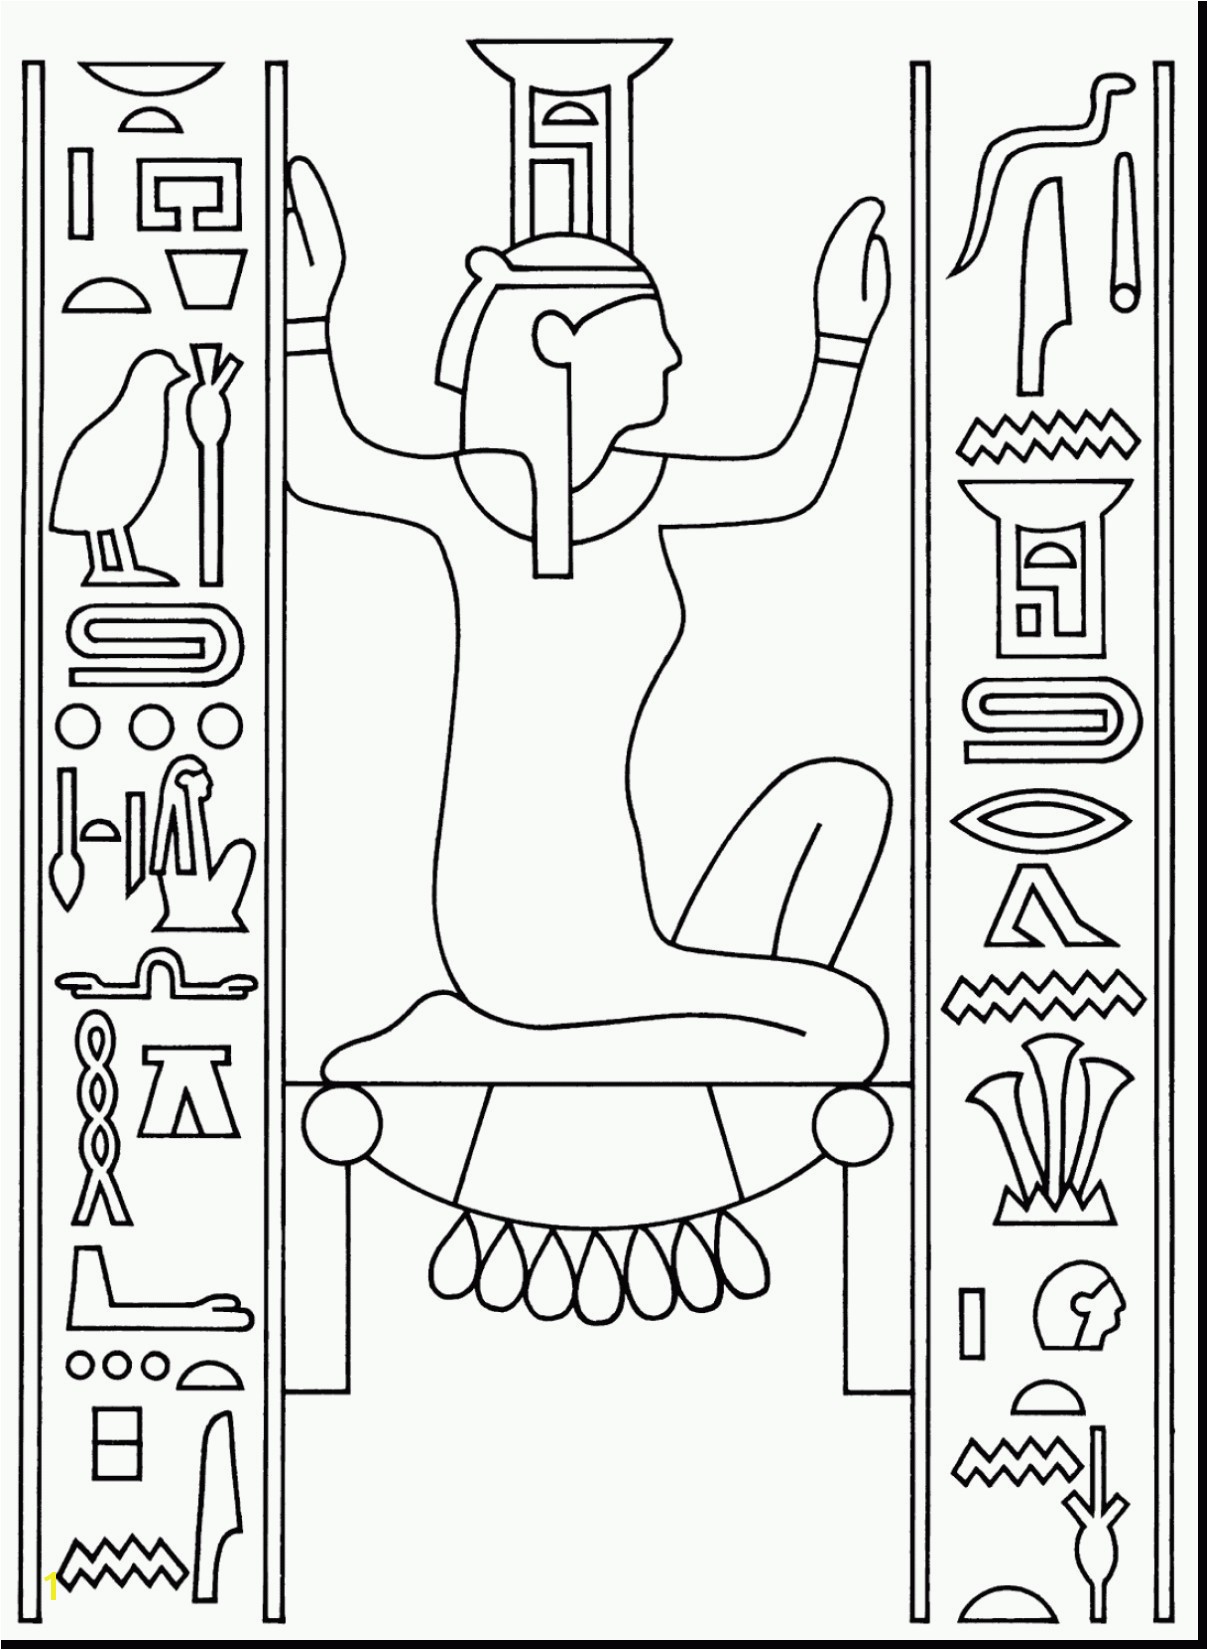 Ancient israel Coloring Pages Elegant Outstanding israelites Leave Egypt Coloring Pages Picture Collection Ancient israel